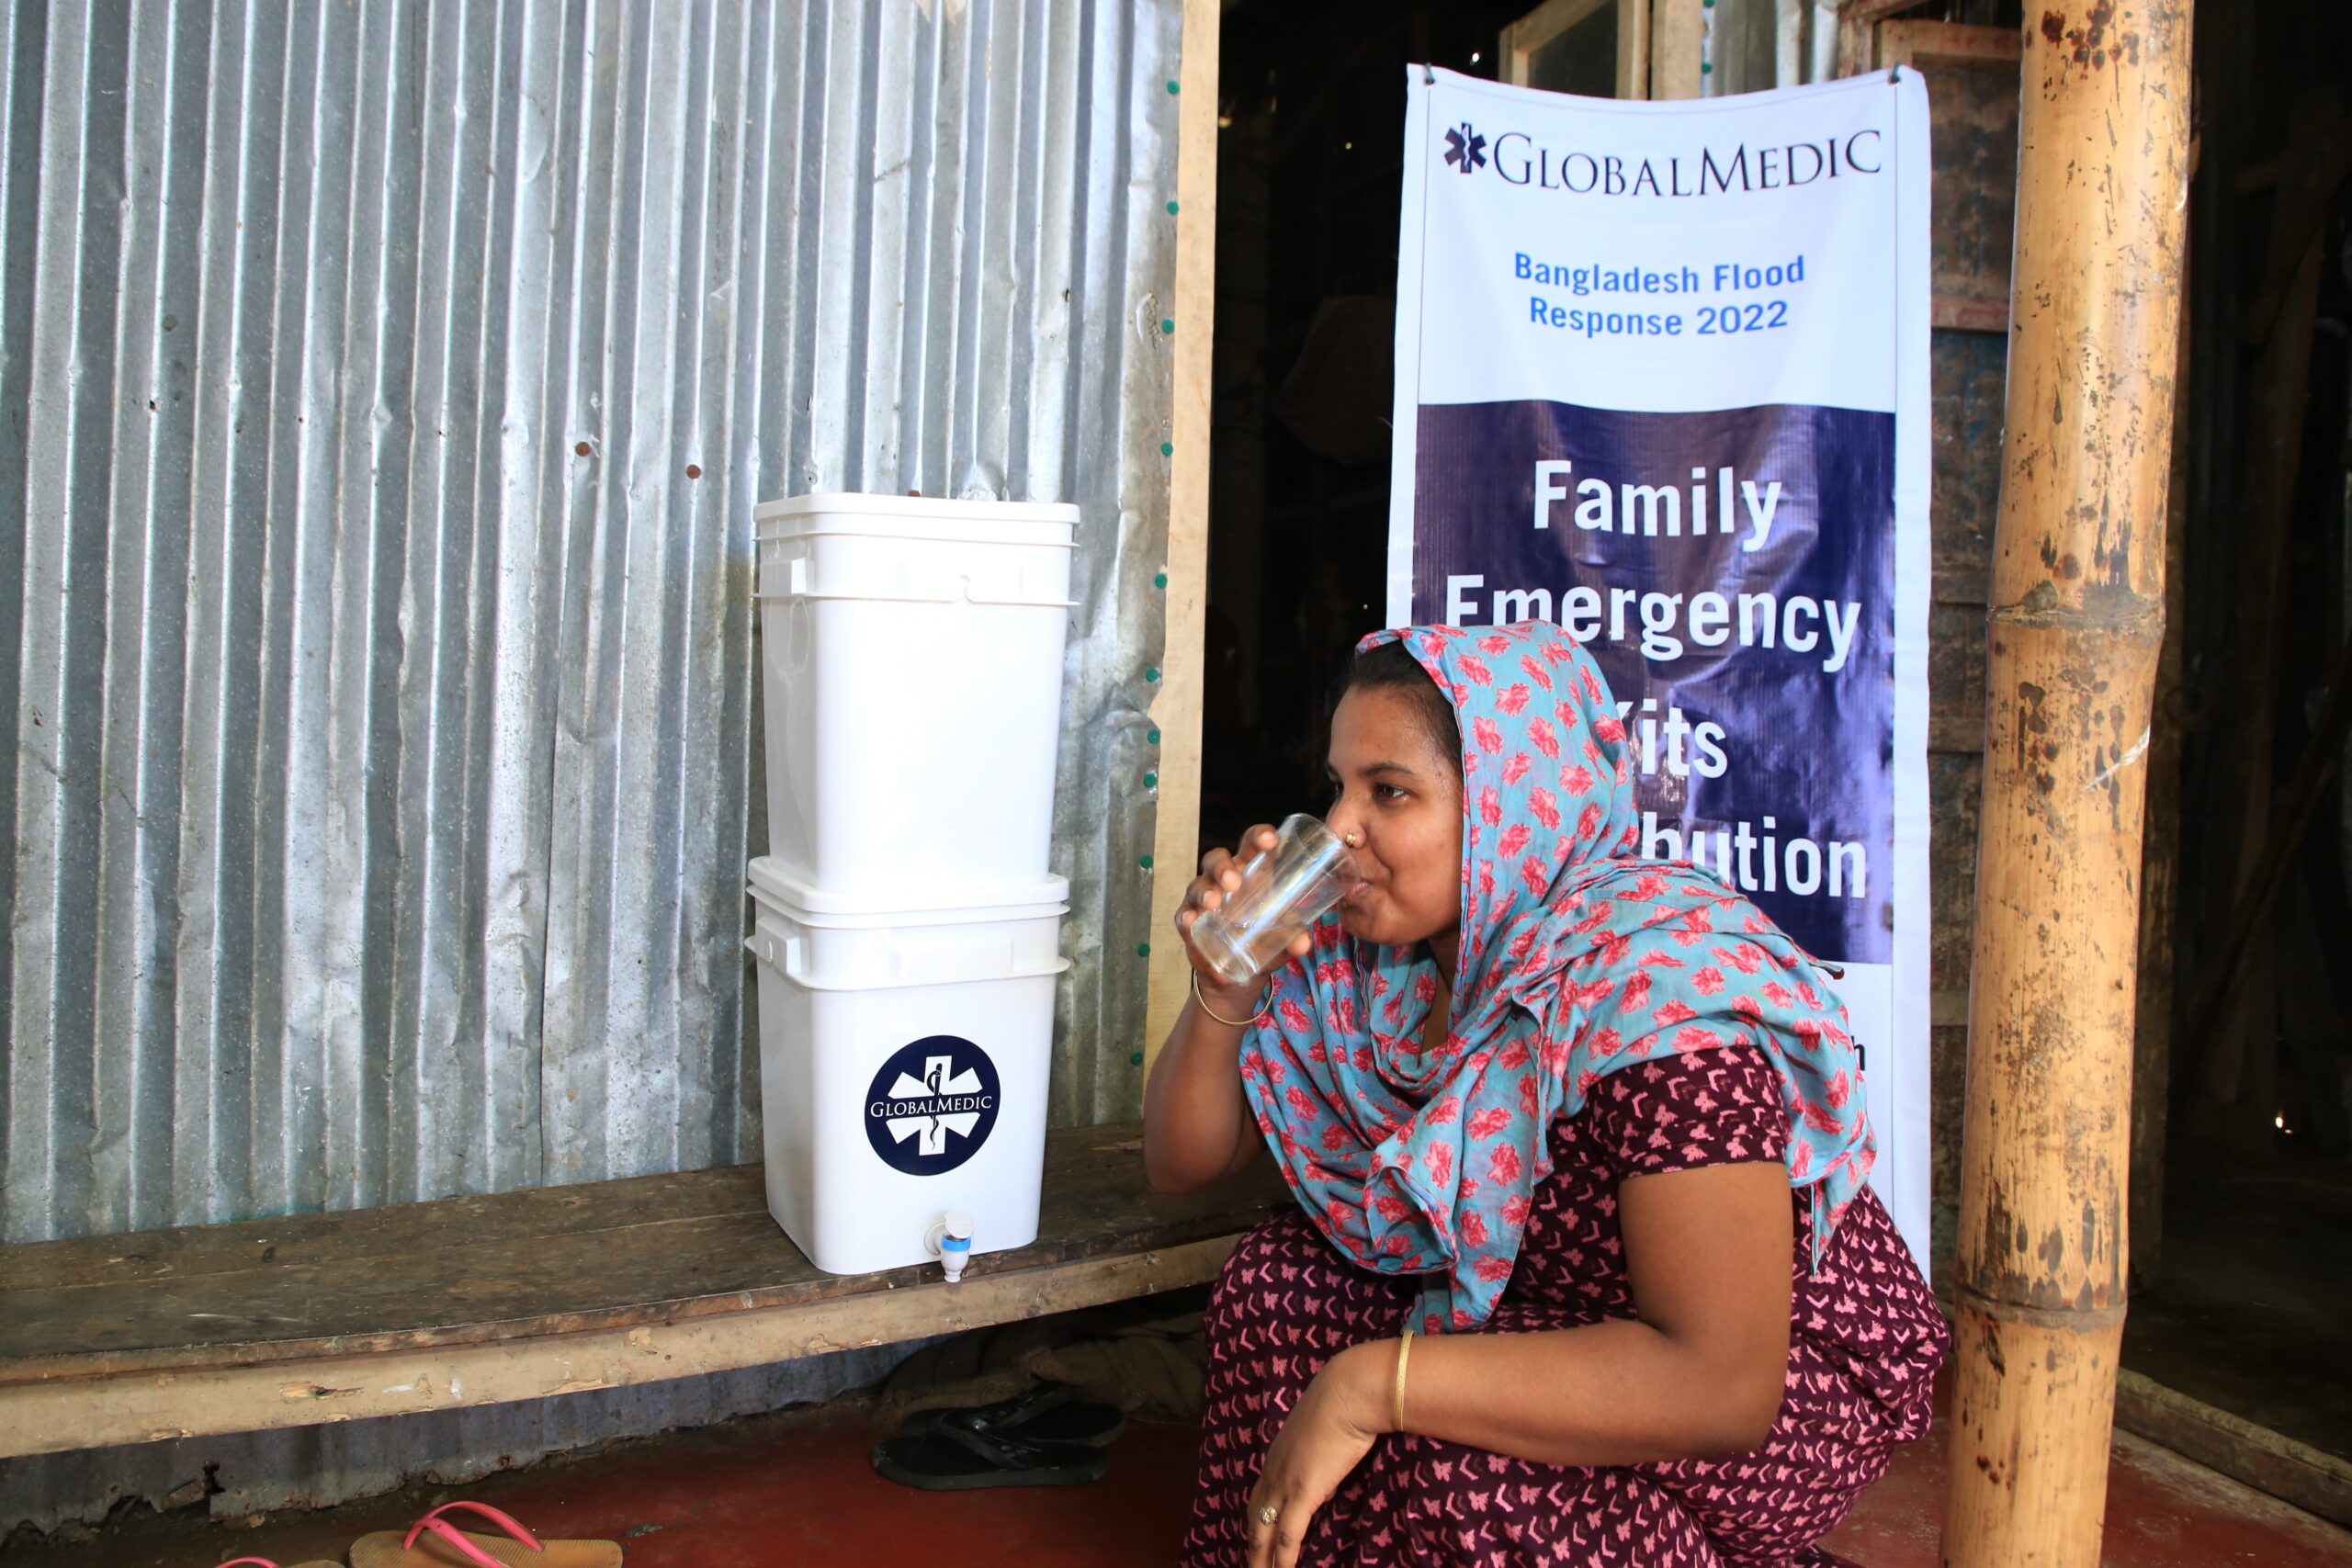 Sylhet Flooding Response: A woman drinking water from a glass kneeling in front of a water filtration unit unit